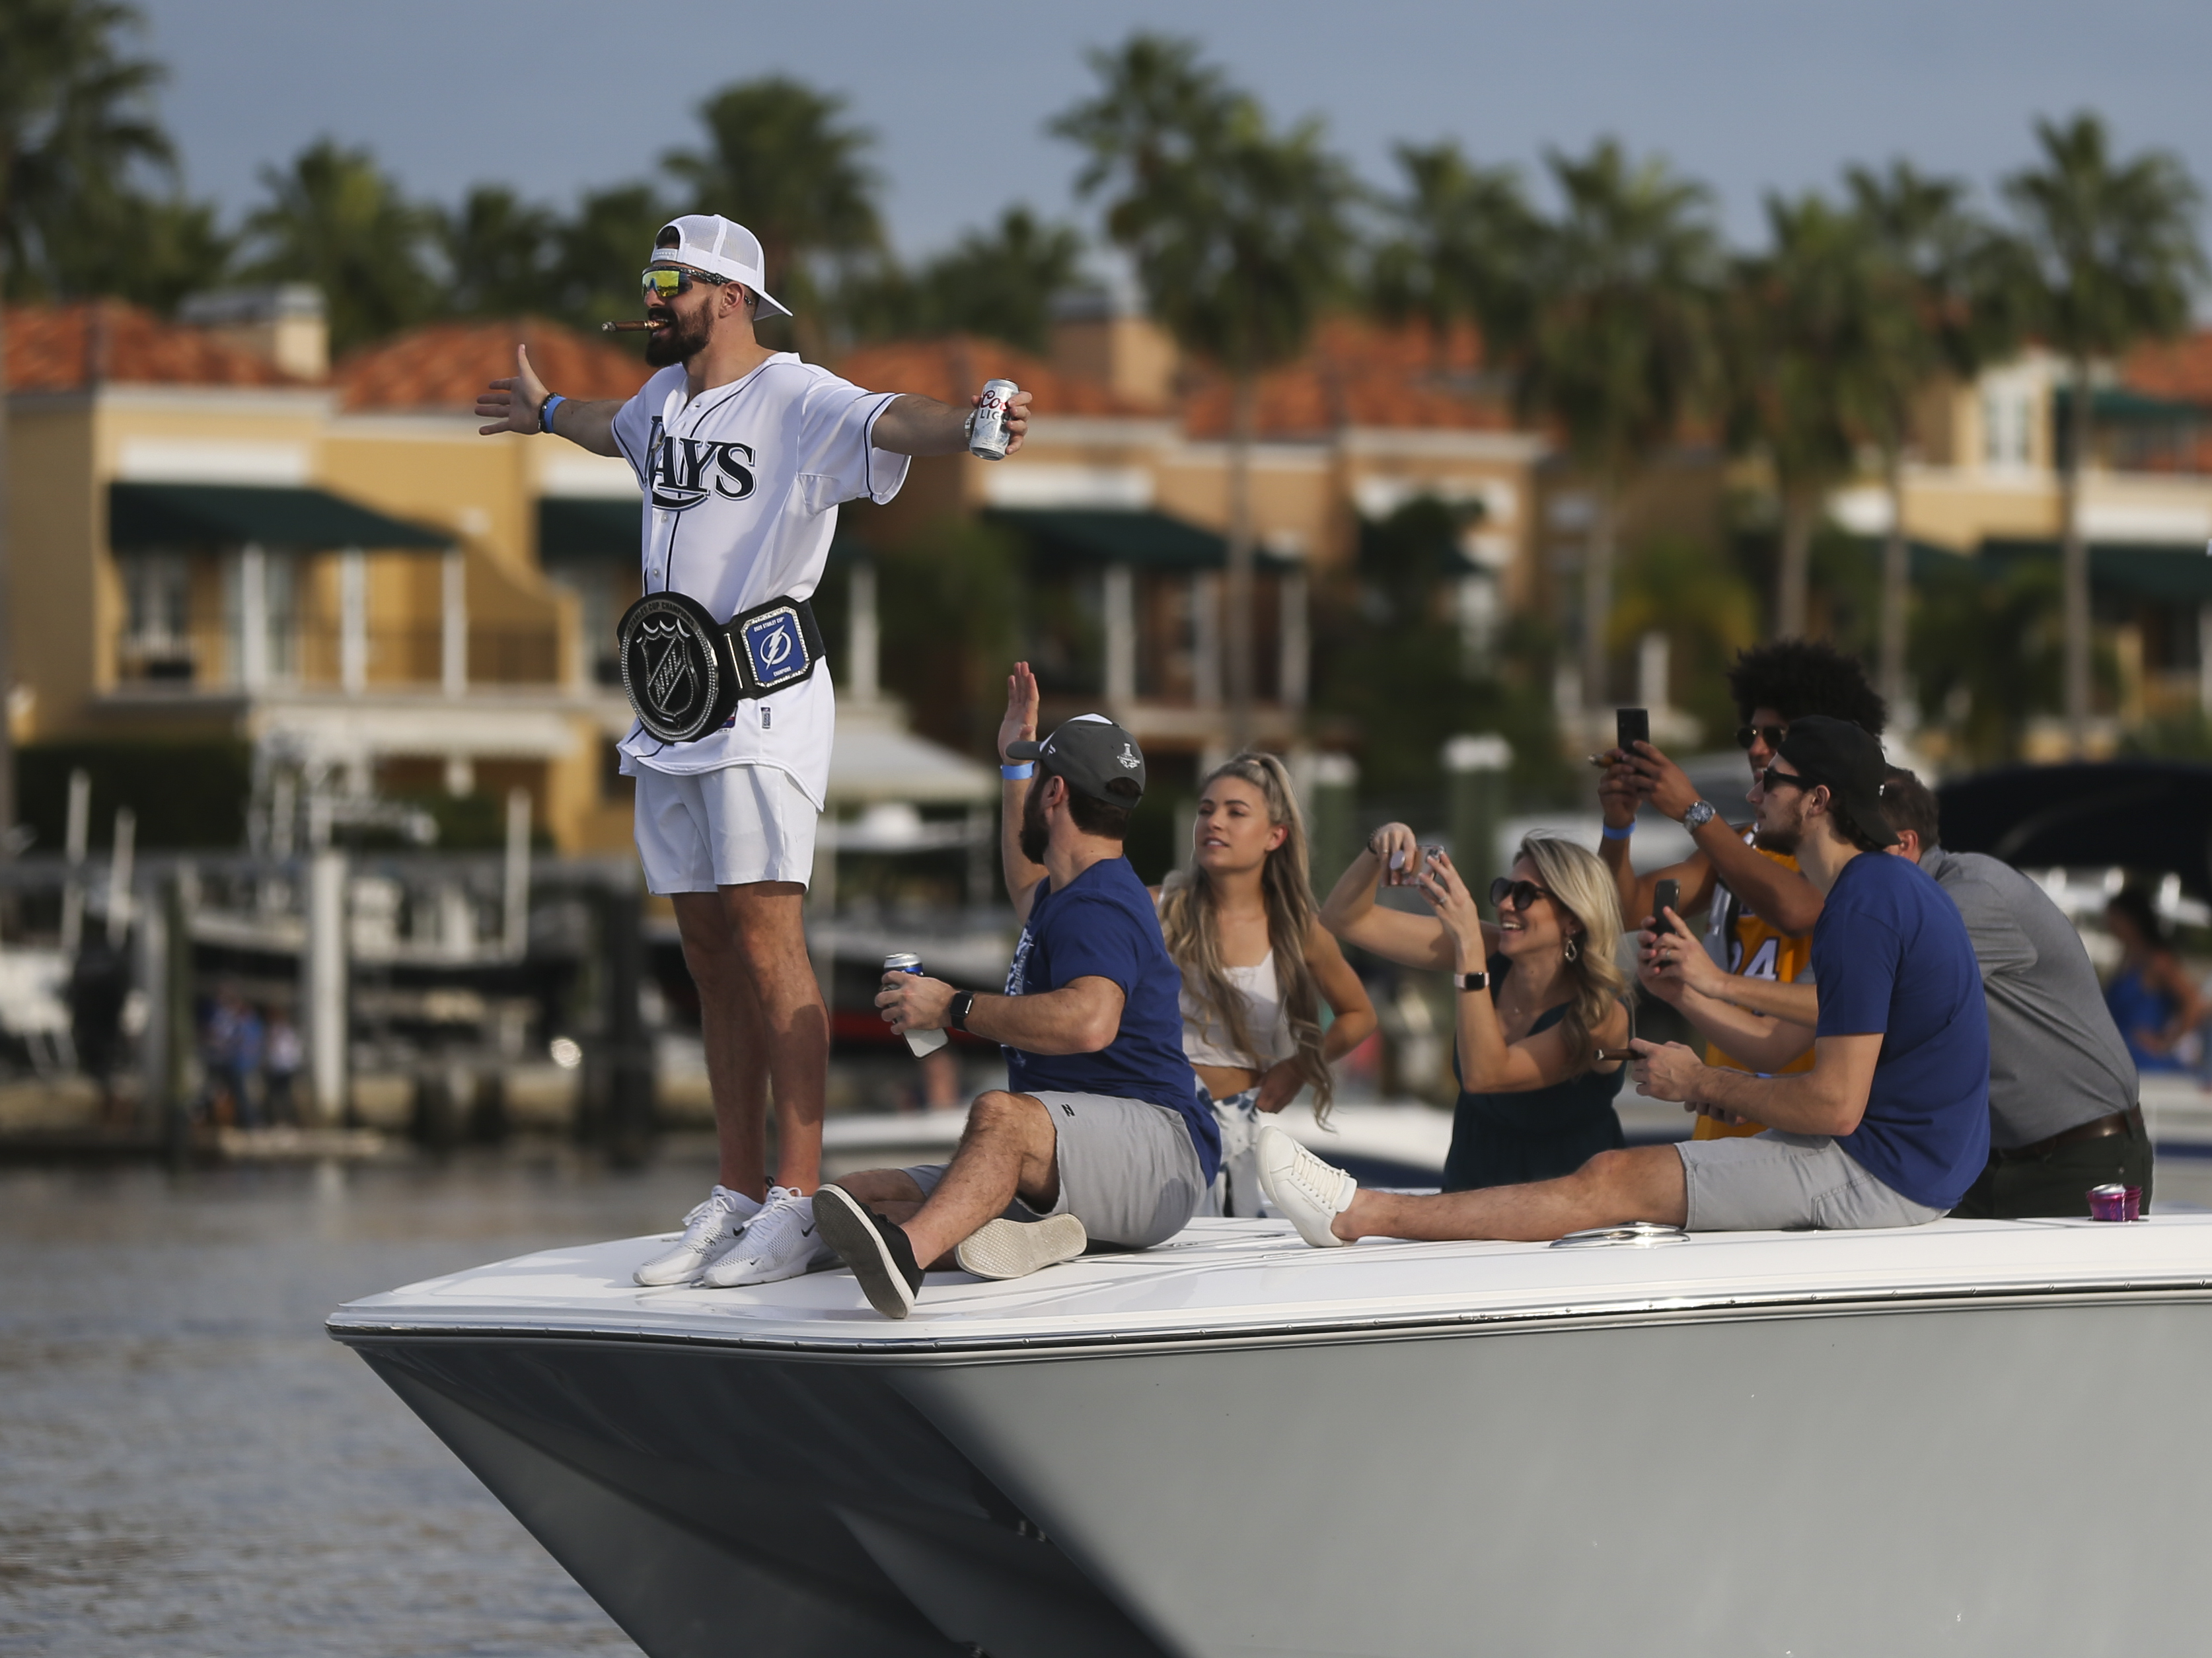 Lightning celebrate second Stanley Cup championship with boat